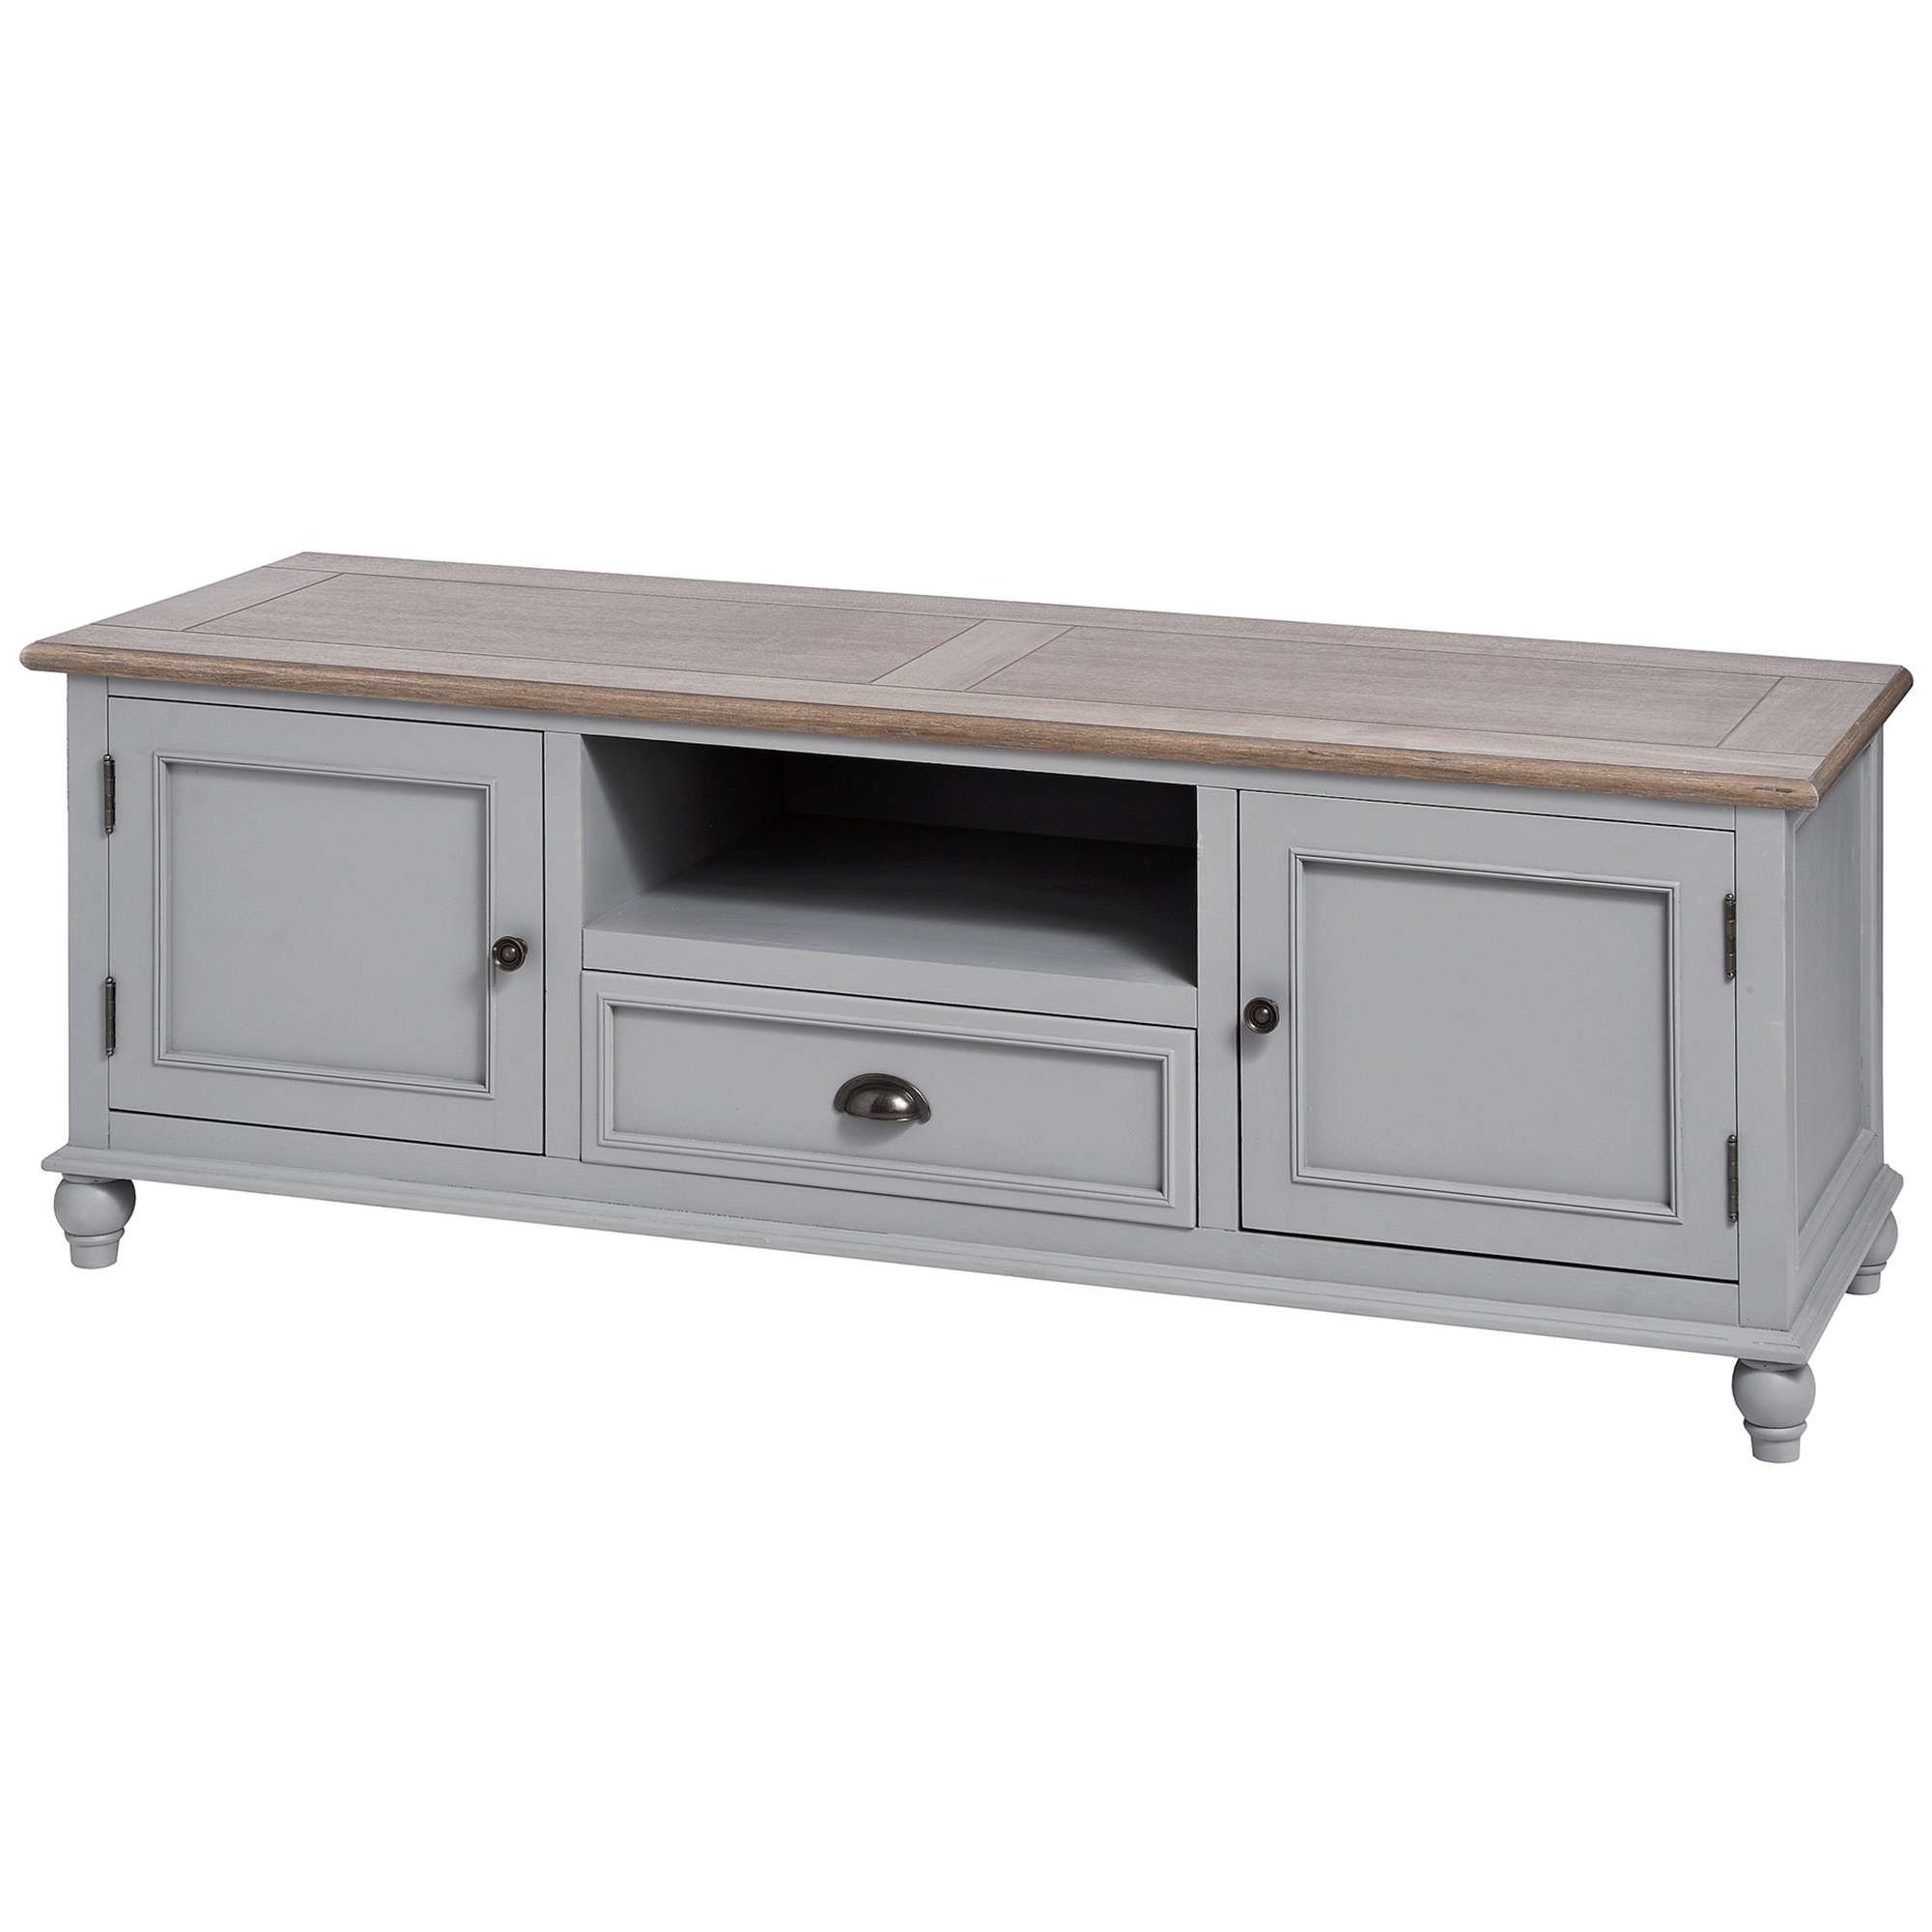 Churchill Shabby Chic Tv Cabinet | Available Now With Regard To Shabby Chic Tv Cabinets (View 1 of 20)